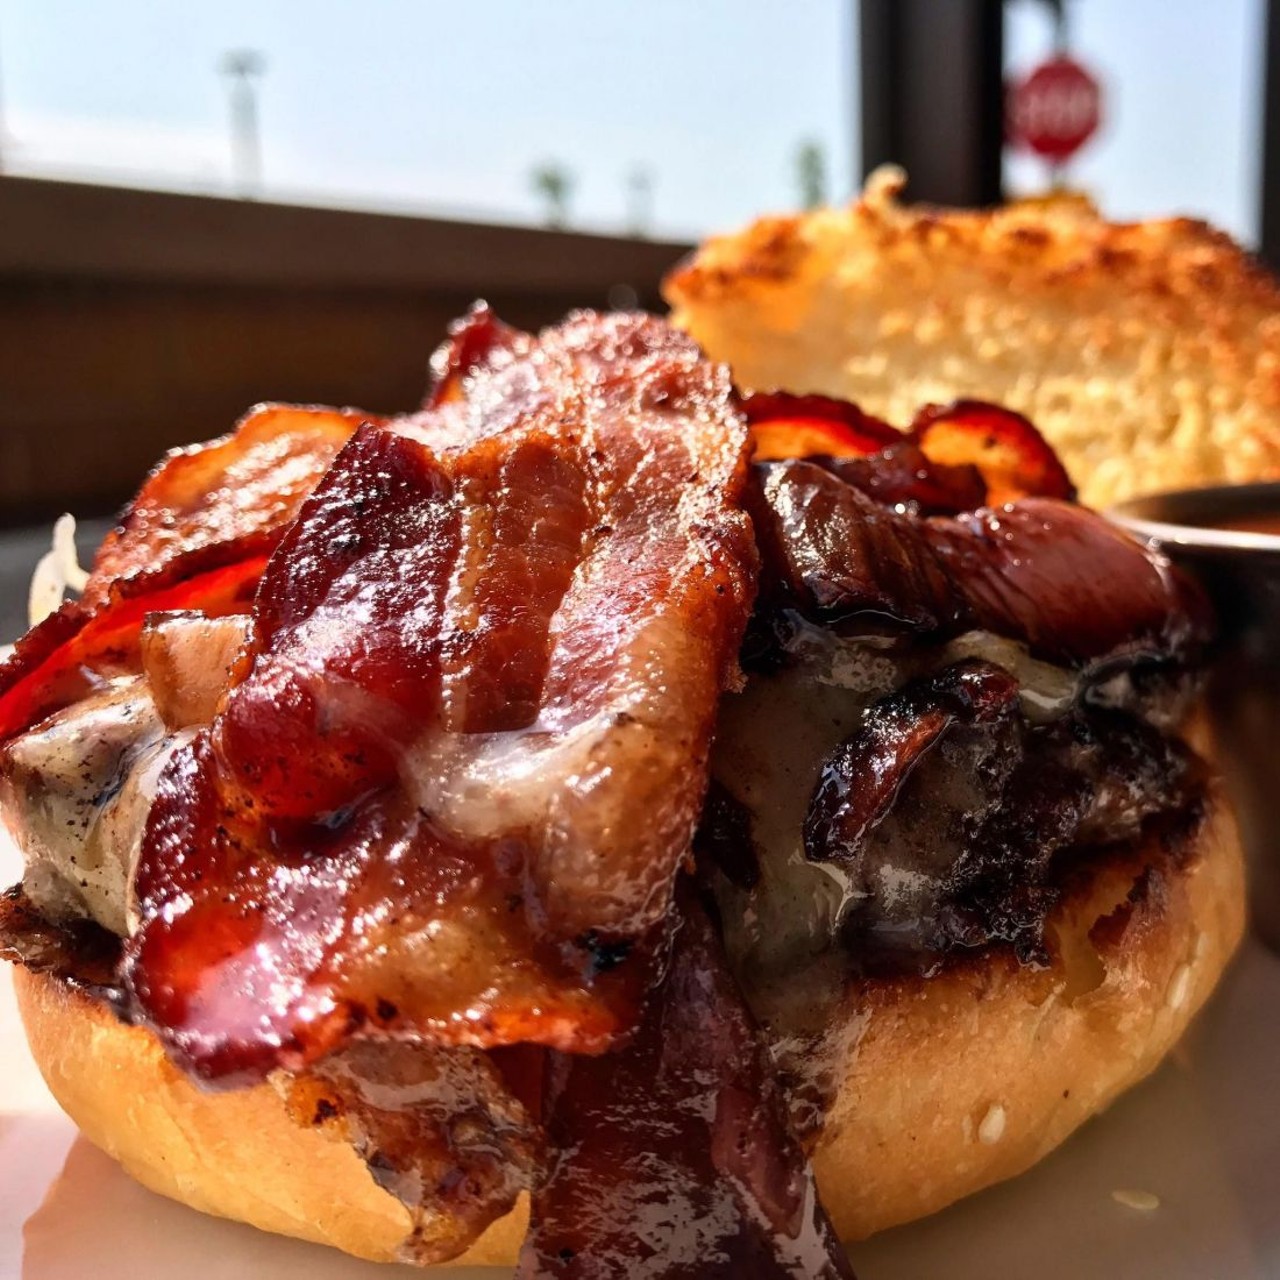  Flip Side 
Multiple Locations
Flip Side is offering their house burger which comes with two year aged Cheddar cheese, apple wood bacon, charred balsamic vinegar red onions and house made barbeque sauce.
Photo Provided by Restaurant